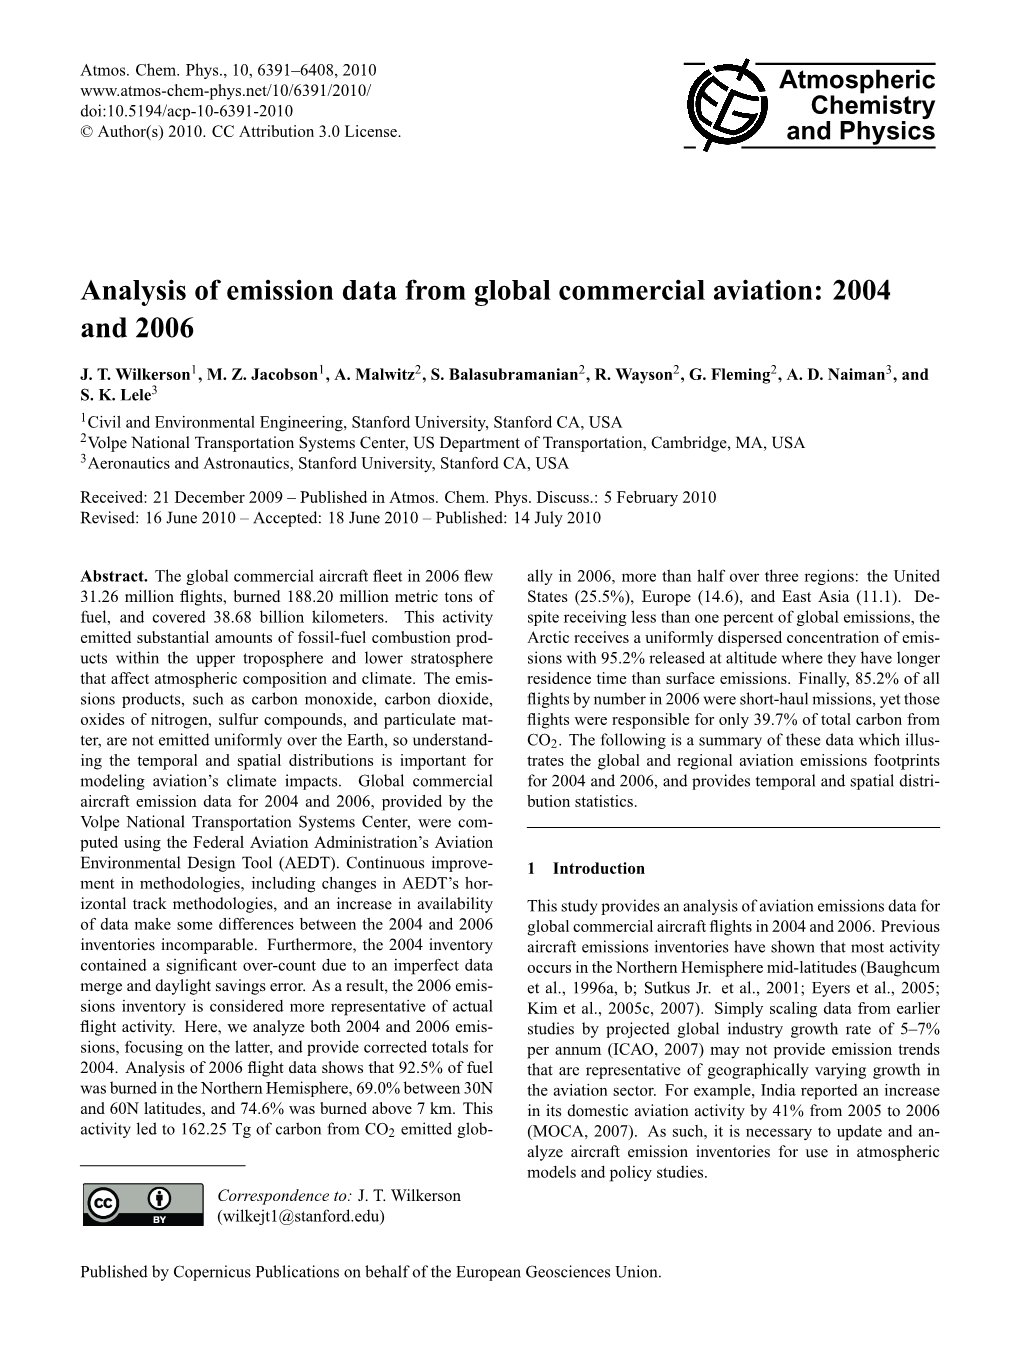 Analysis of Emission Data from Global Commercial Aviation: 2004 and 2006